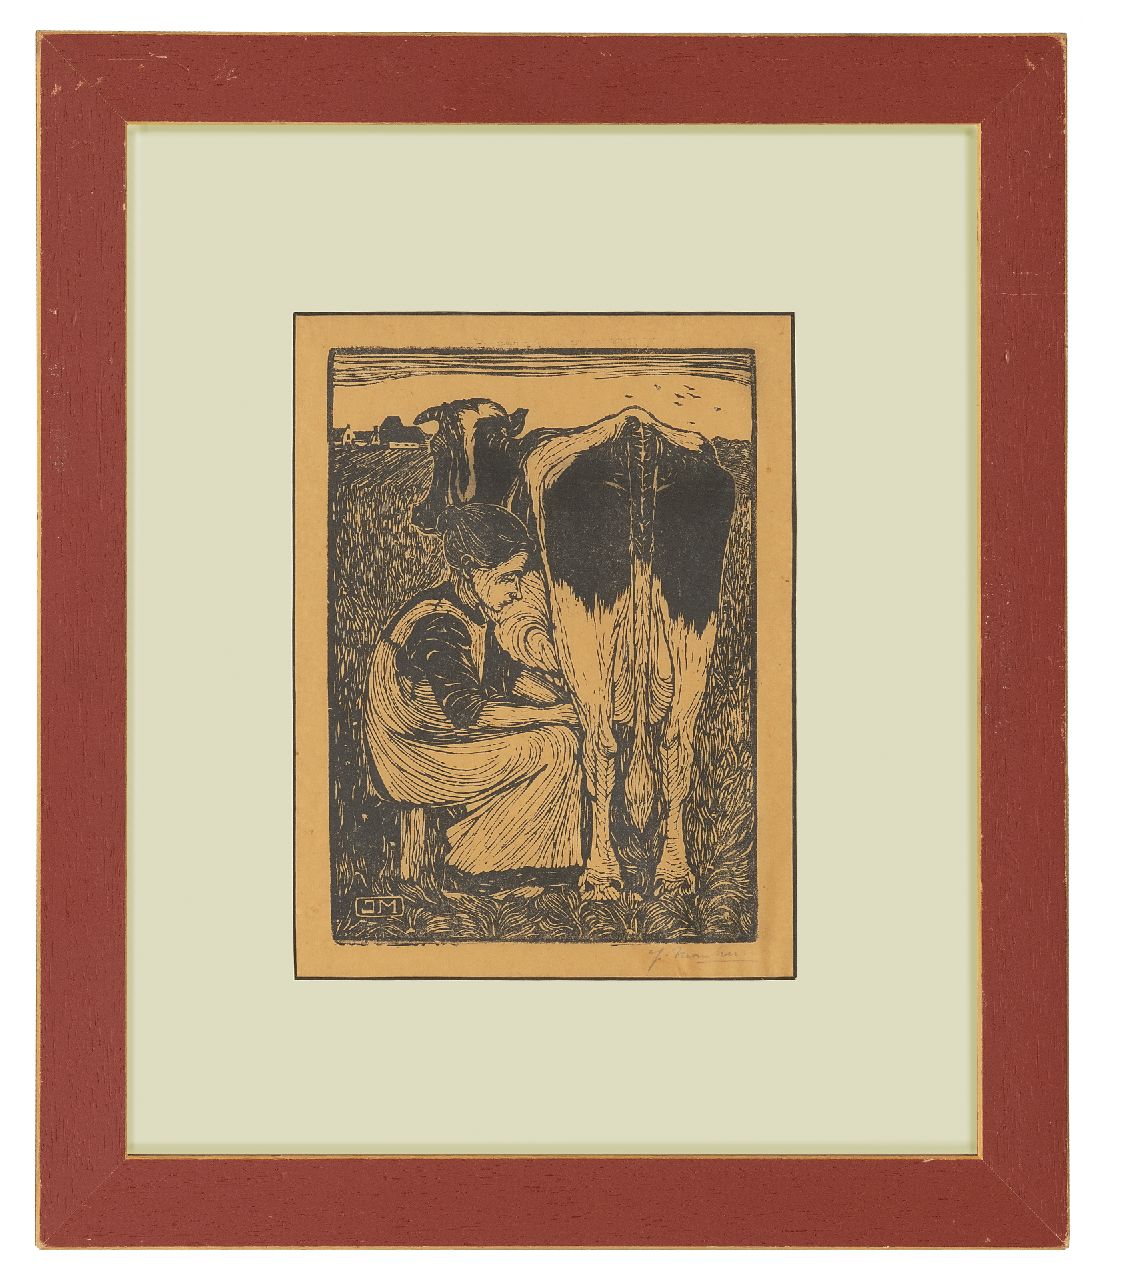 Mankes J.  | Jan Mankes, Milking the cow, woodcut on paper 19.2 x 14.2 cm, signed l.r. in full (in pencil) and with mon.in the block and executed ca 1914